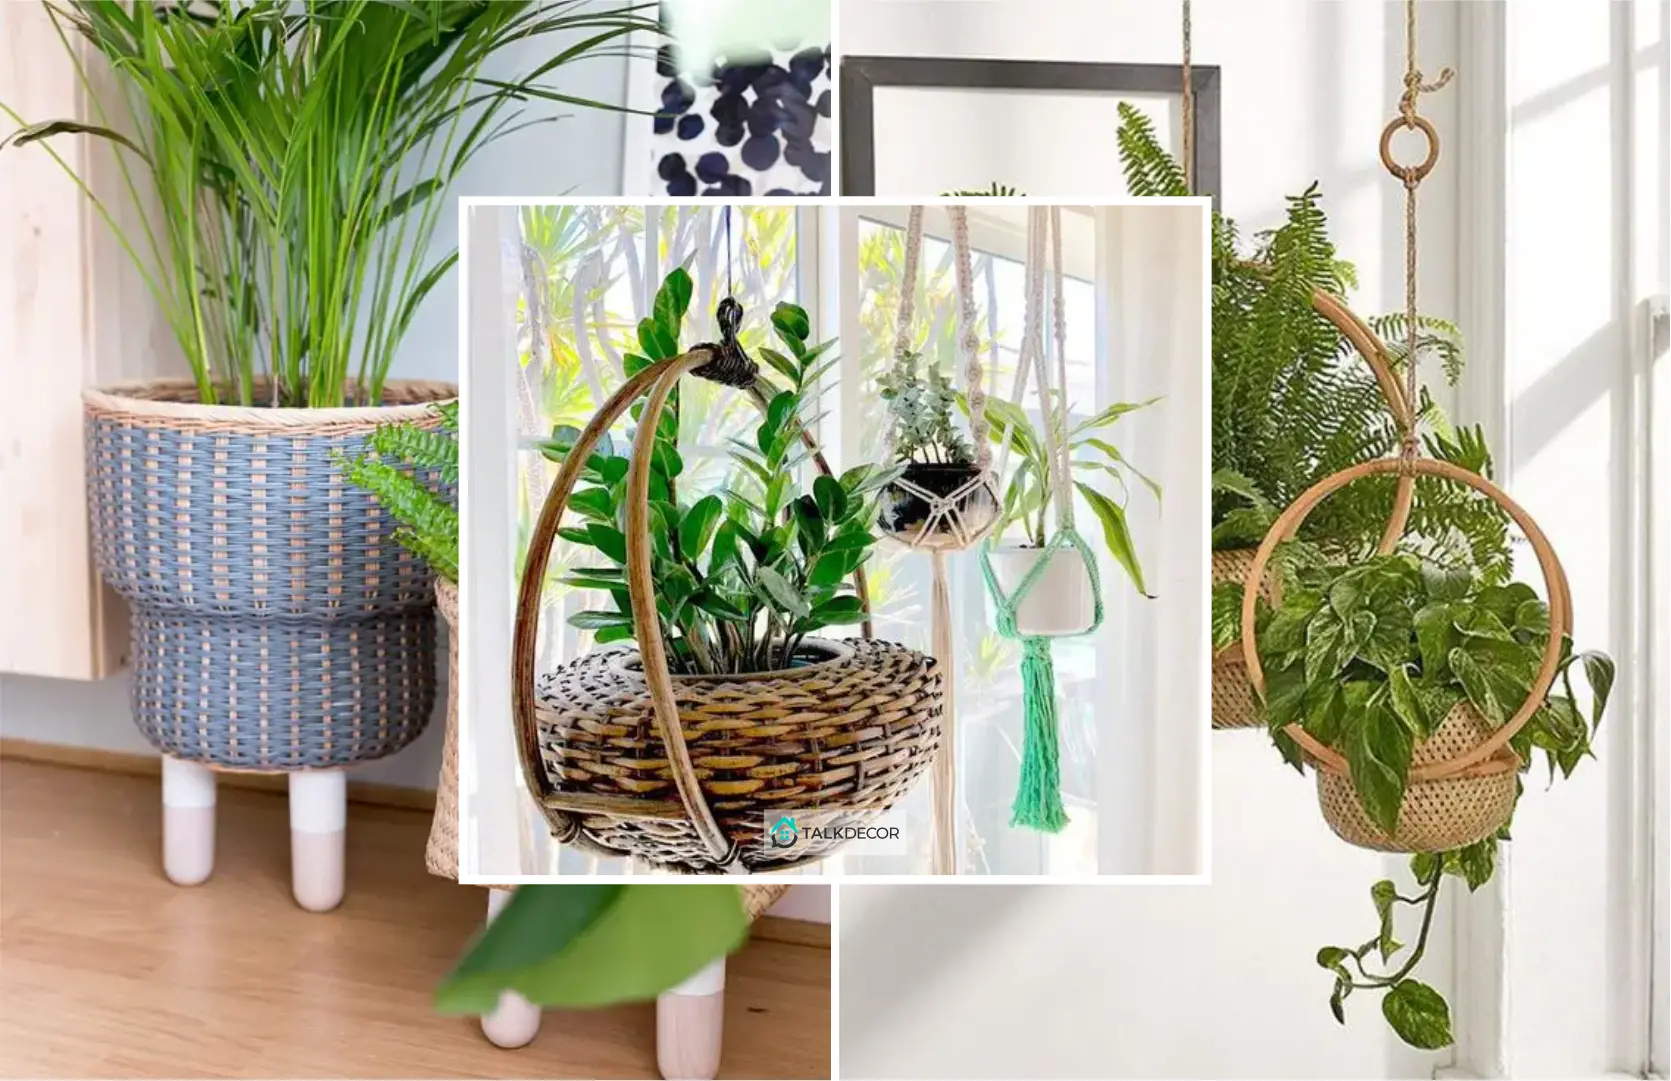 How to Use Basket as Your Planter